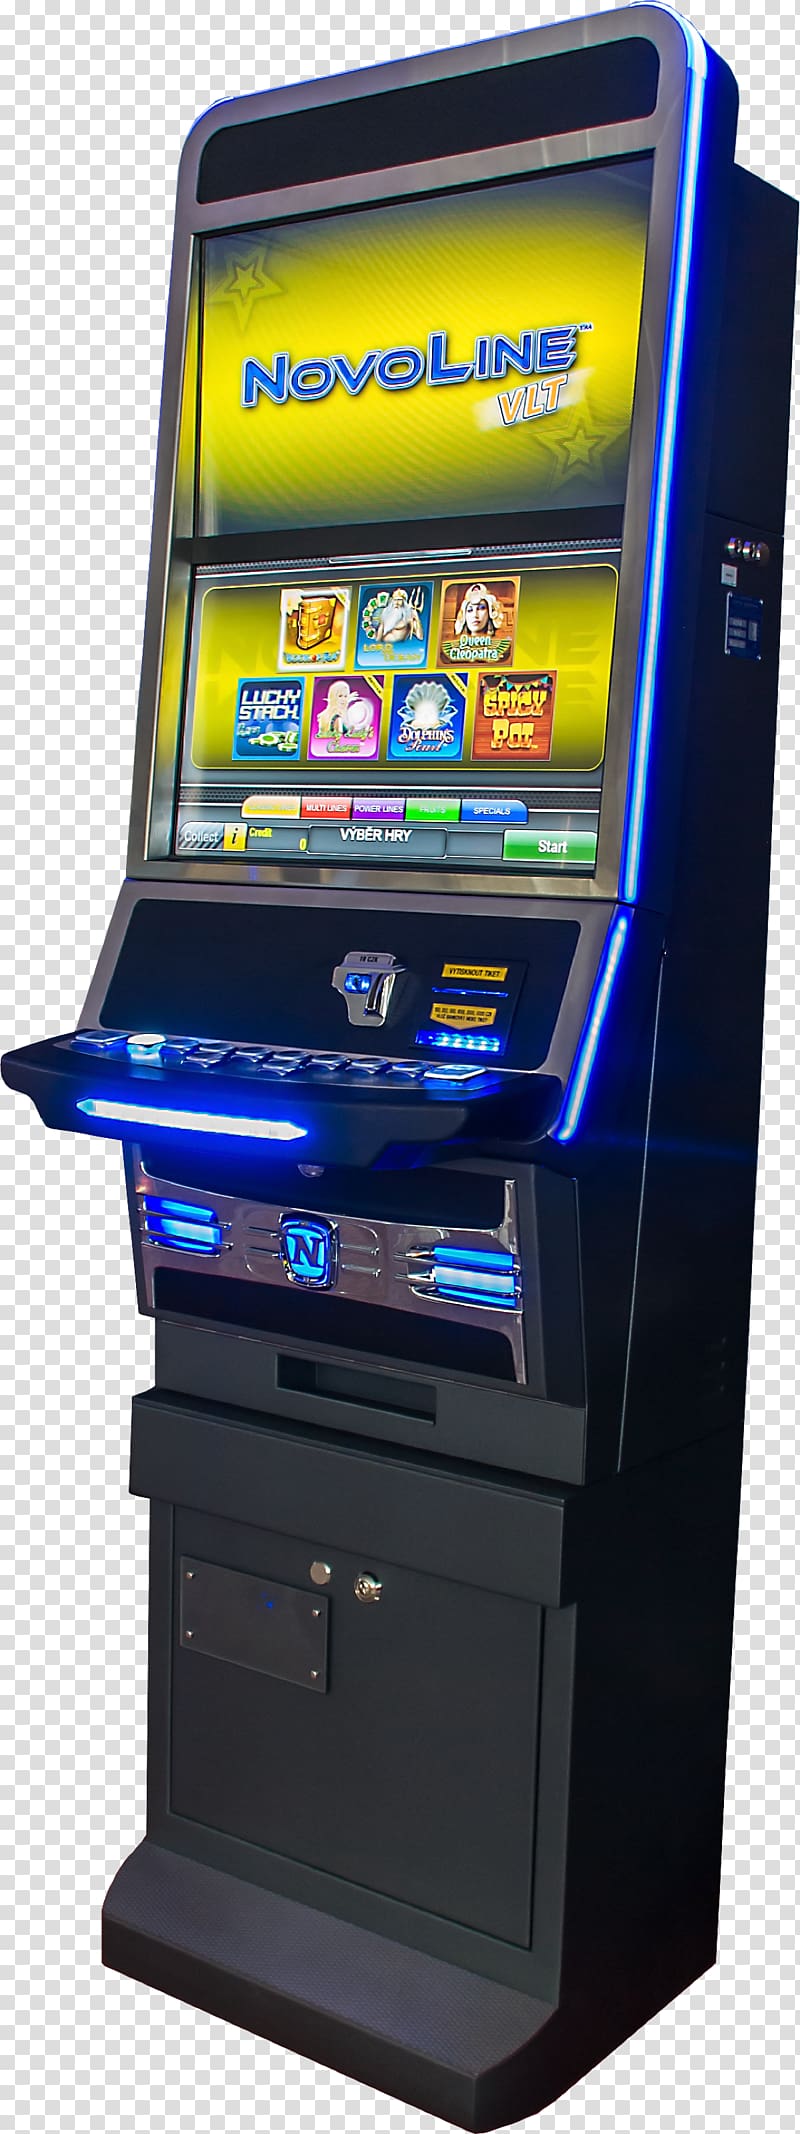 Video lottery terminal Fruit Machines Arcade cabinet, giant stack of books transparent background PNG clipart